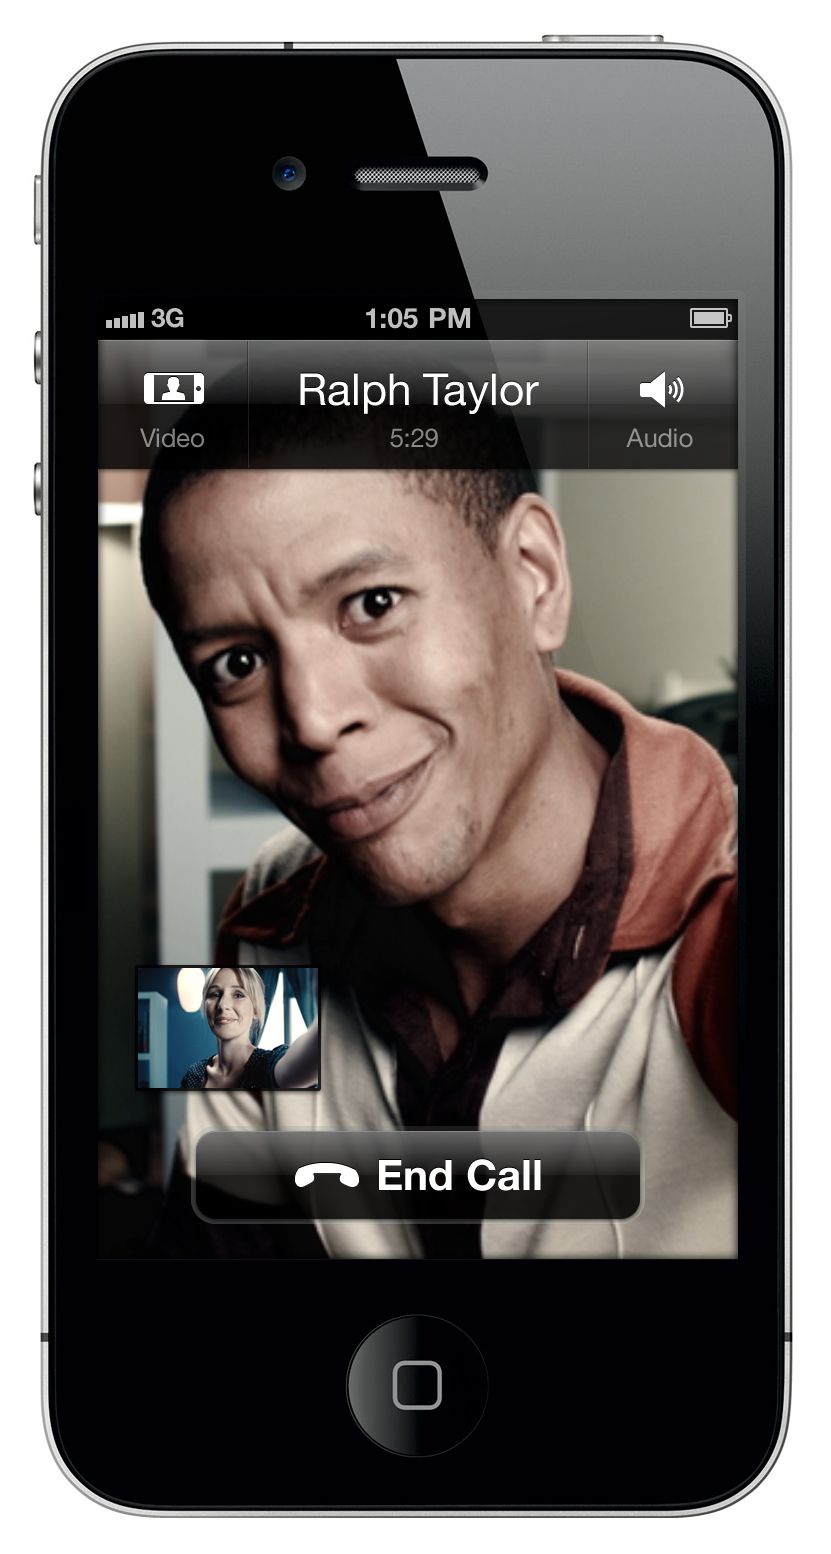 Skype for iPhone video chat